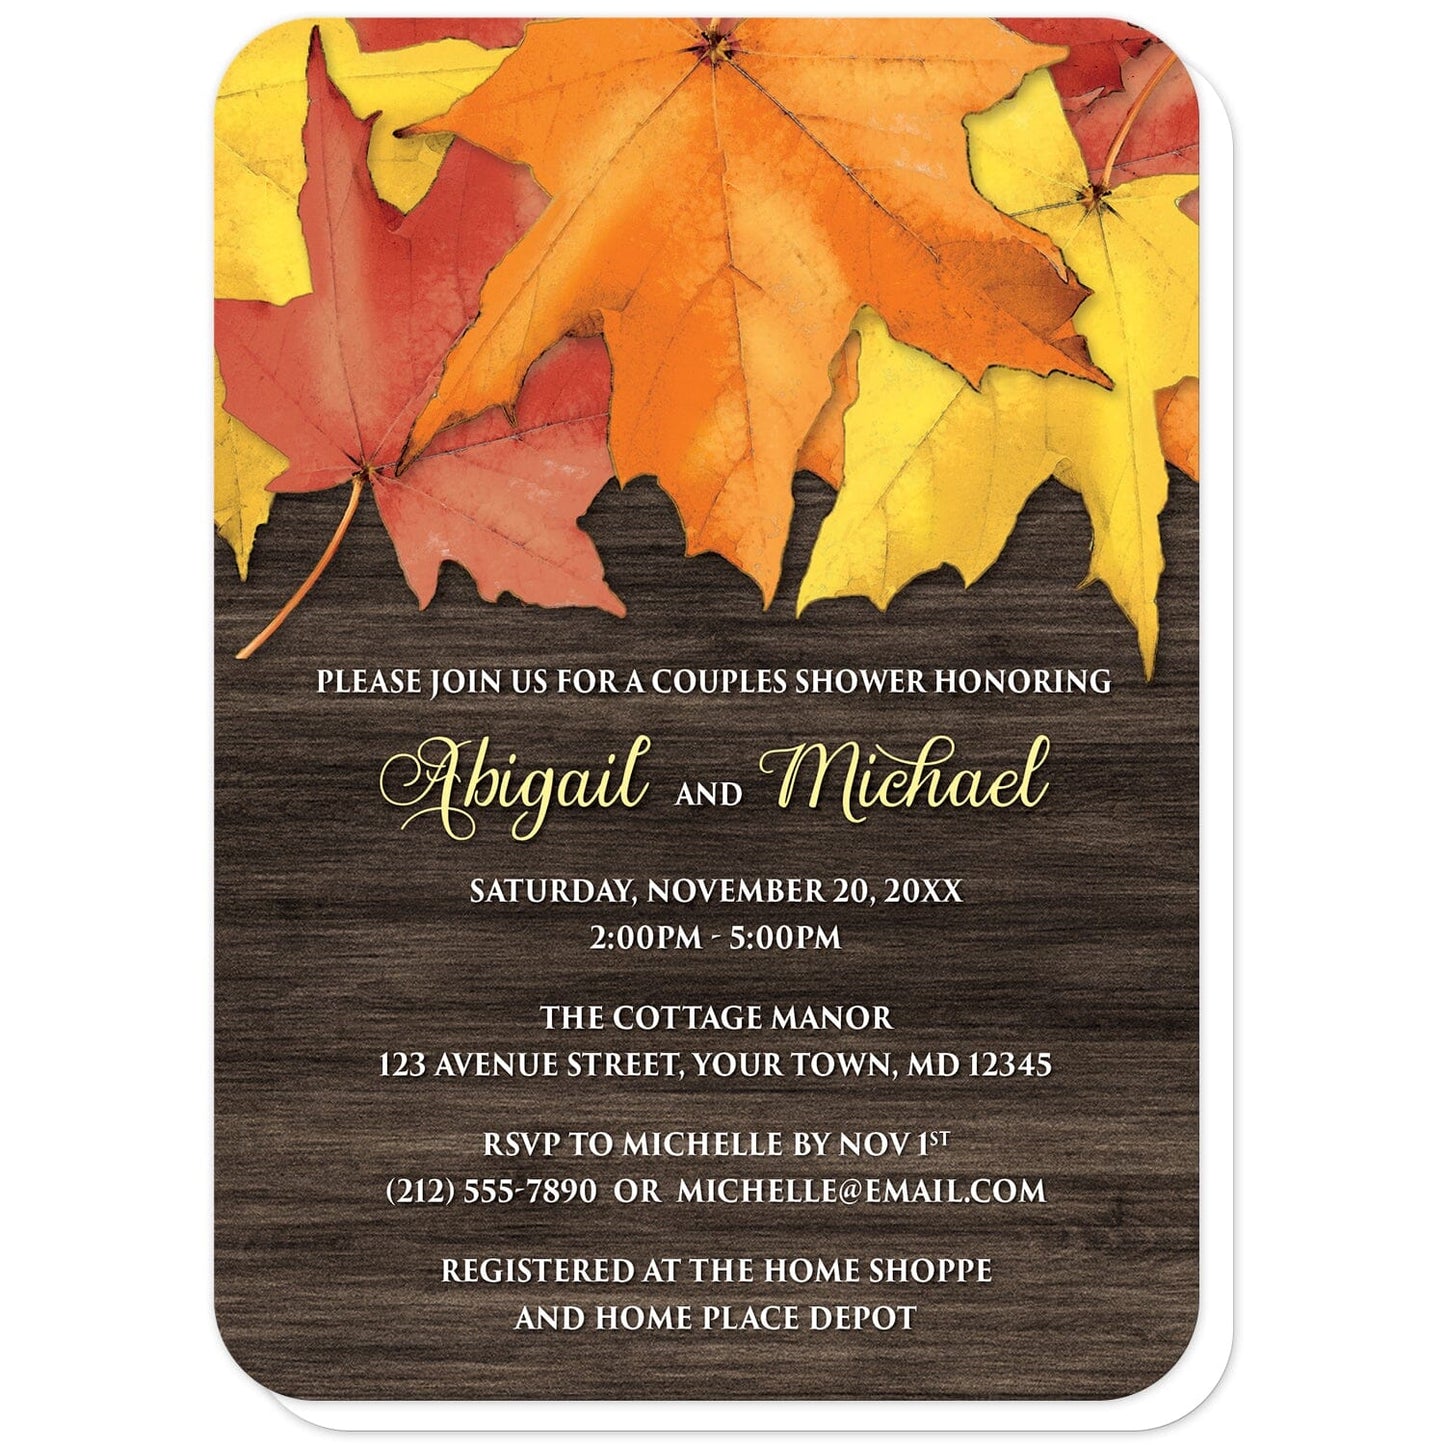 Rustic Autumn Leaves Wood Couples Shower Invitations (with rounded corners) at Artistically Invited. Southern-inspired rustic autumn leaves wood couples shower invitations with an arrangement of rustic yellow, orange, and red fall leaves along the top over a dark brown wood pattern. Your personalized couples shower celebration details are custom printed in yellow and white over the rustic wood background. 